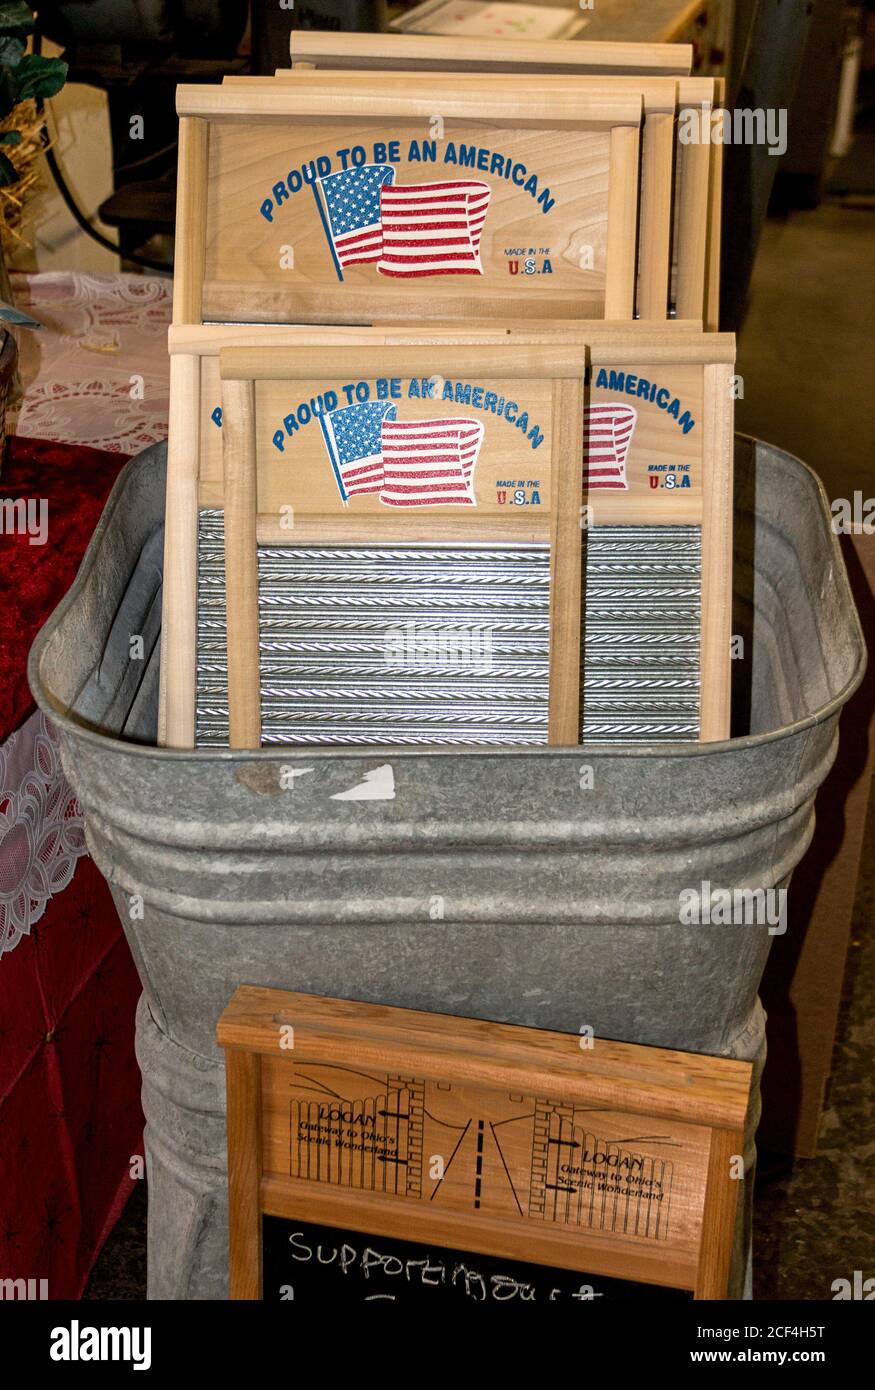 Tub with washboards that will be sent to US servicemen in outlying posts where they must wash their clothes by hand. The kit includes a bucket, washboard, clothesline, pins and soap. Made by Columbus Washboard Co., Logan, Ohio. The company makes 88 different kinds of washboards. Stock Photo